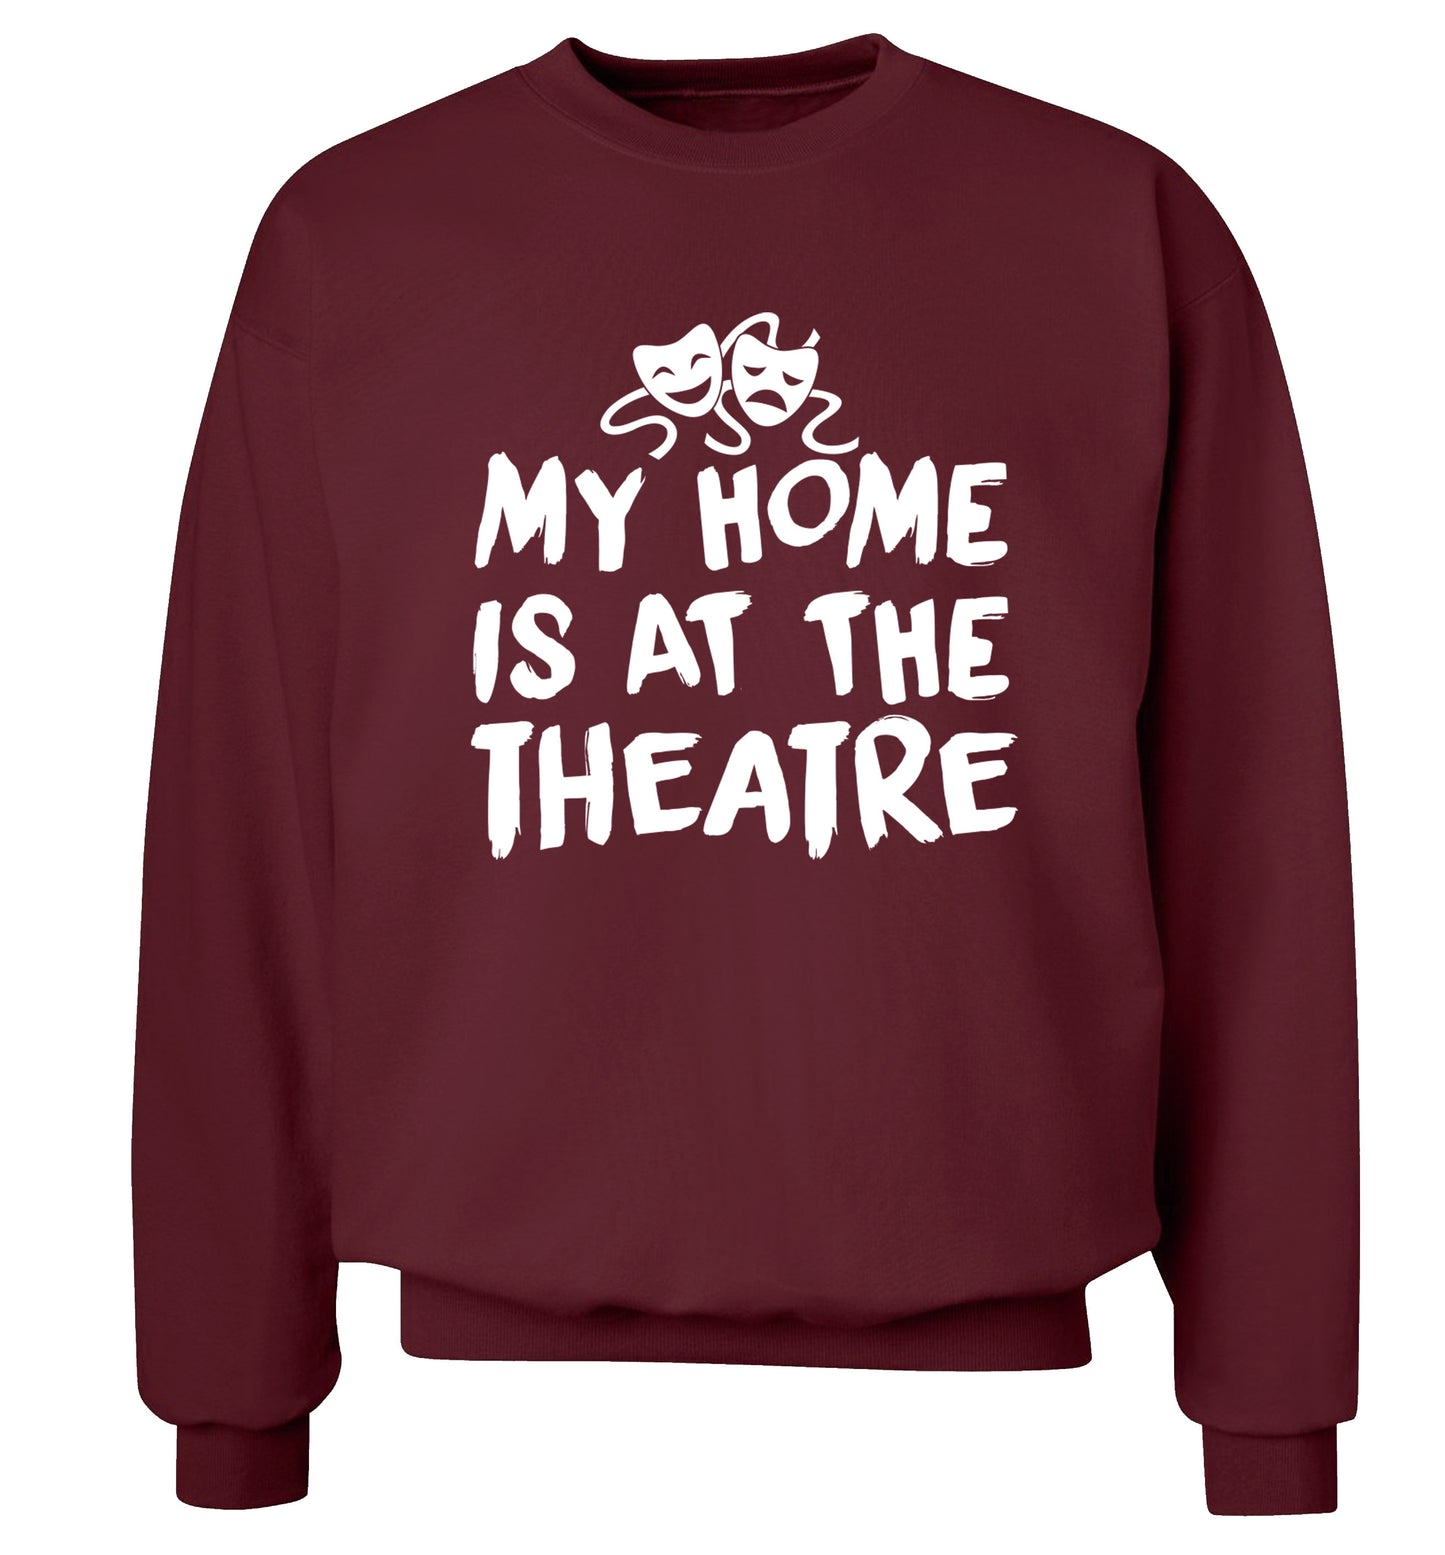 My home is at the theatre Adult's unisex maroon Sweater 2XL